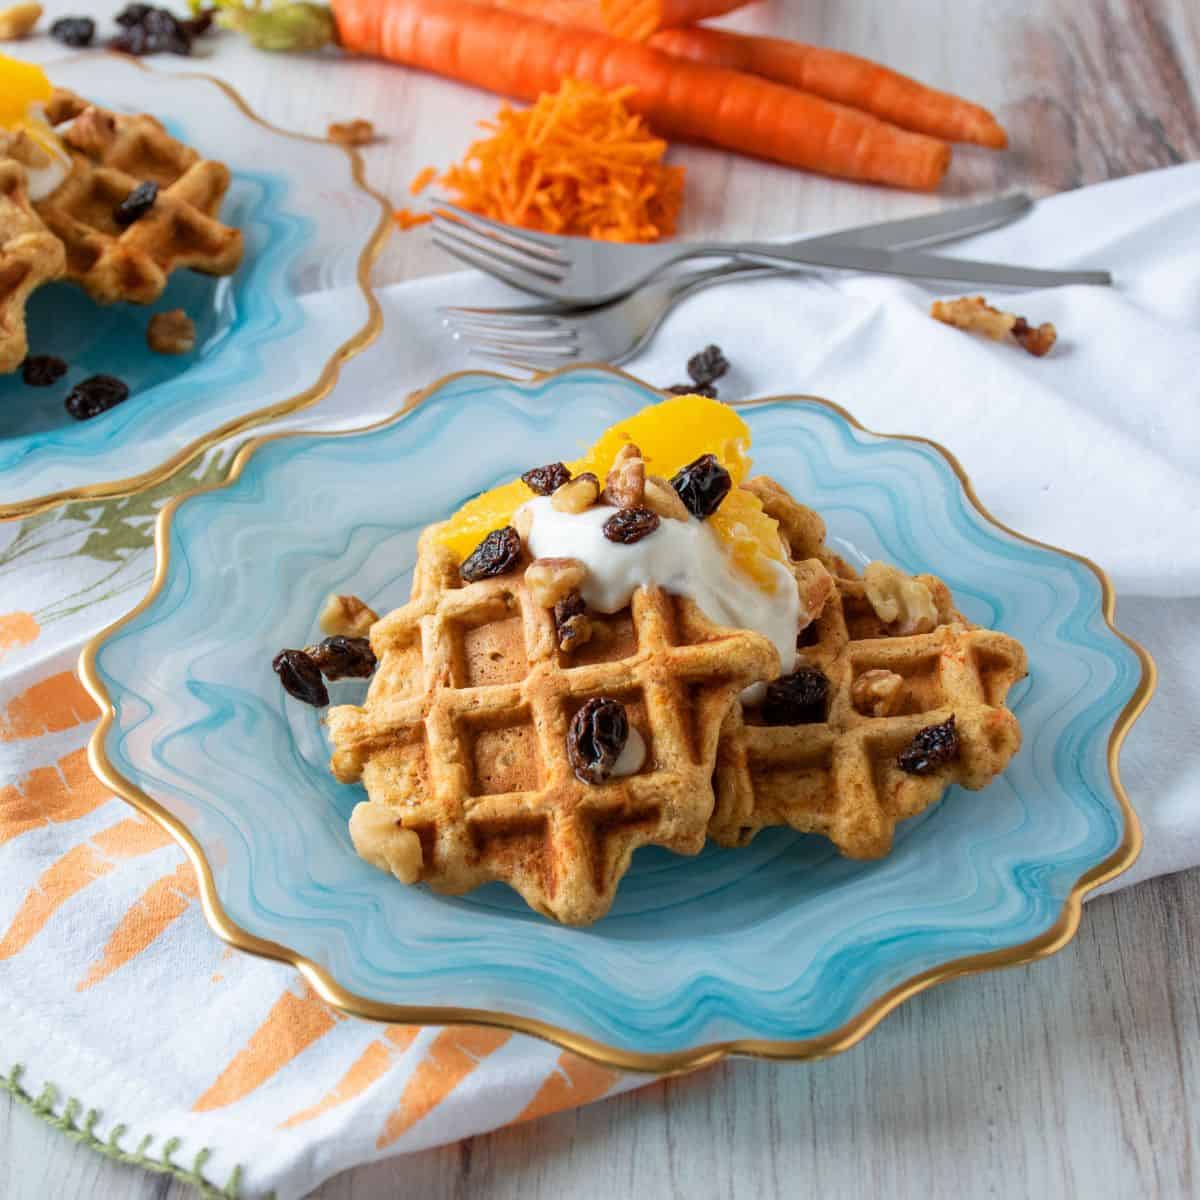 Plate of three small waffles, topped with yogurt, oranges, raisins, and walnuts.